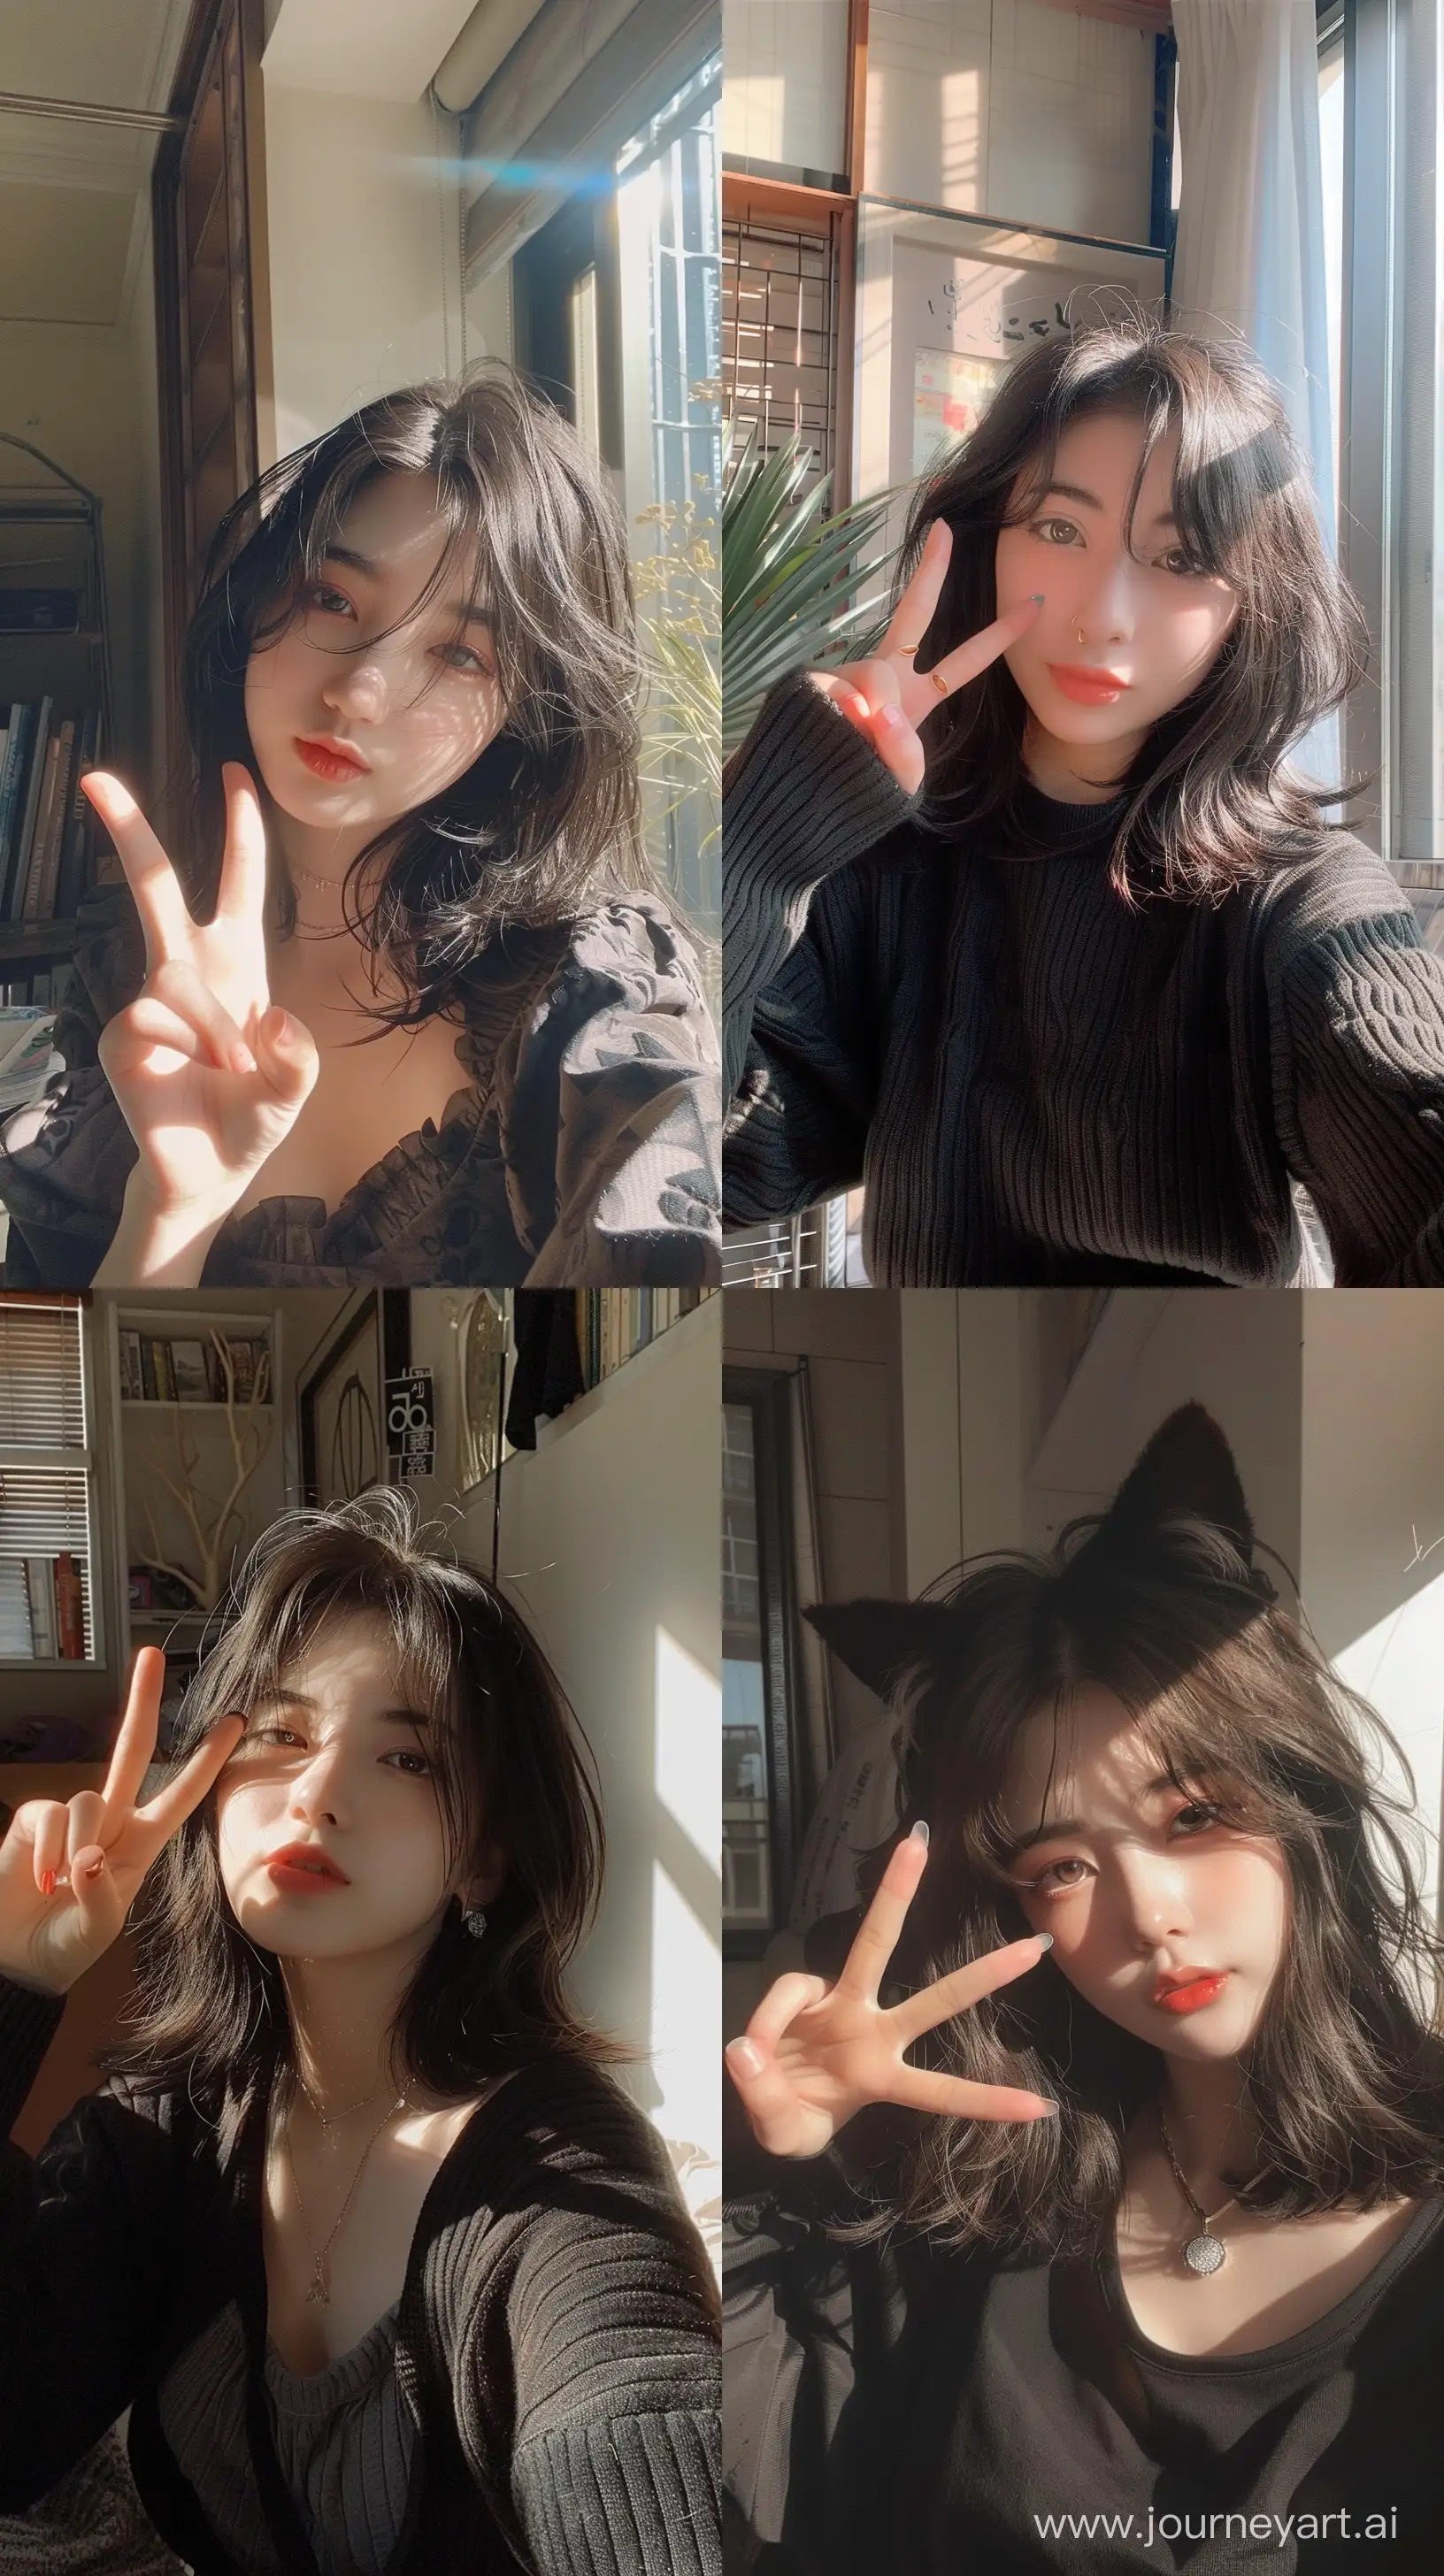 Aesthetic instagram asian girl with medium hair,wolfcut hair style with e girl make up,making peace sign in sunlit room --ar 9:16